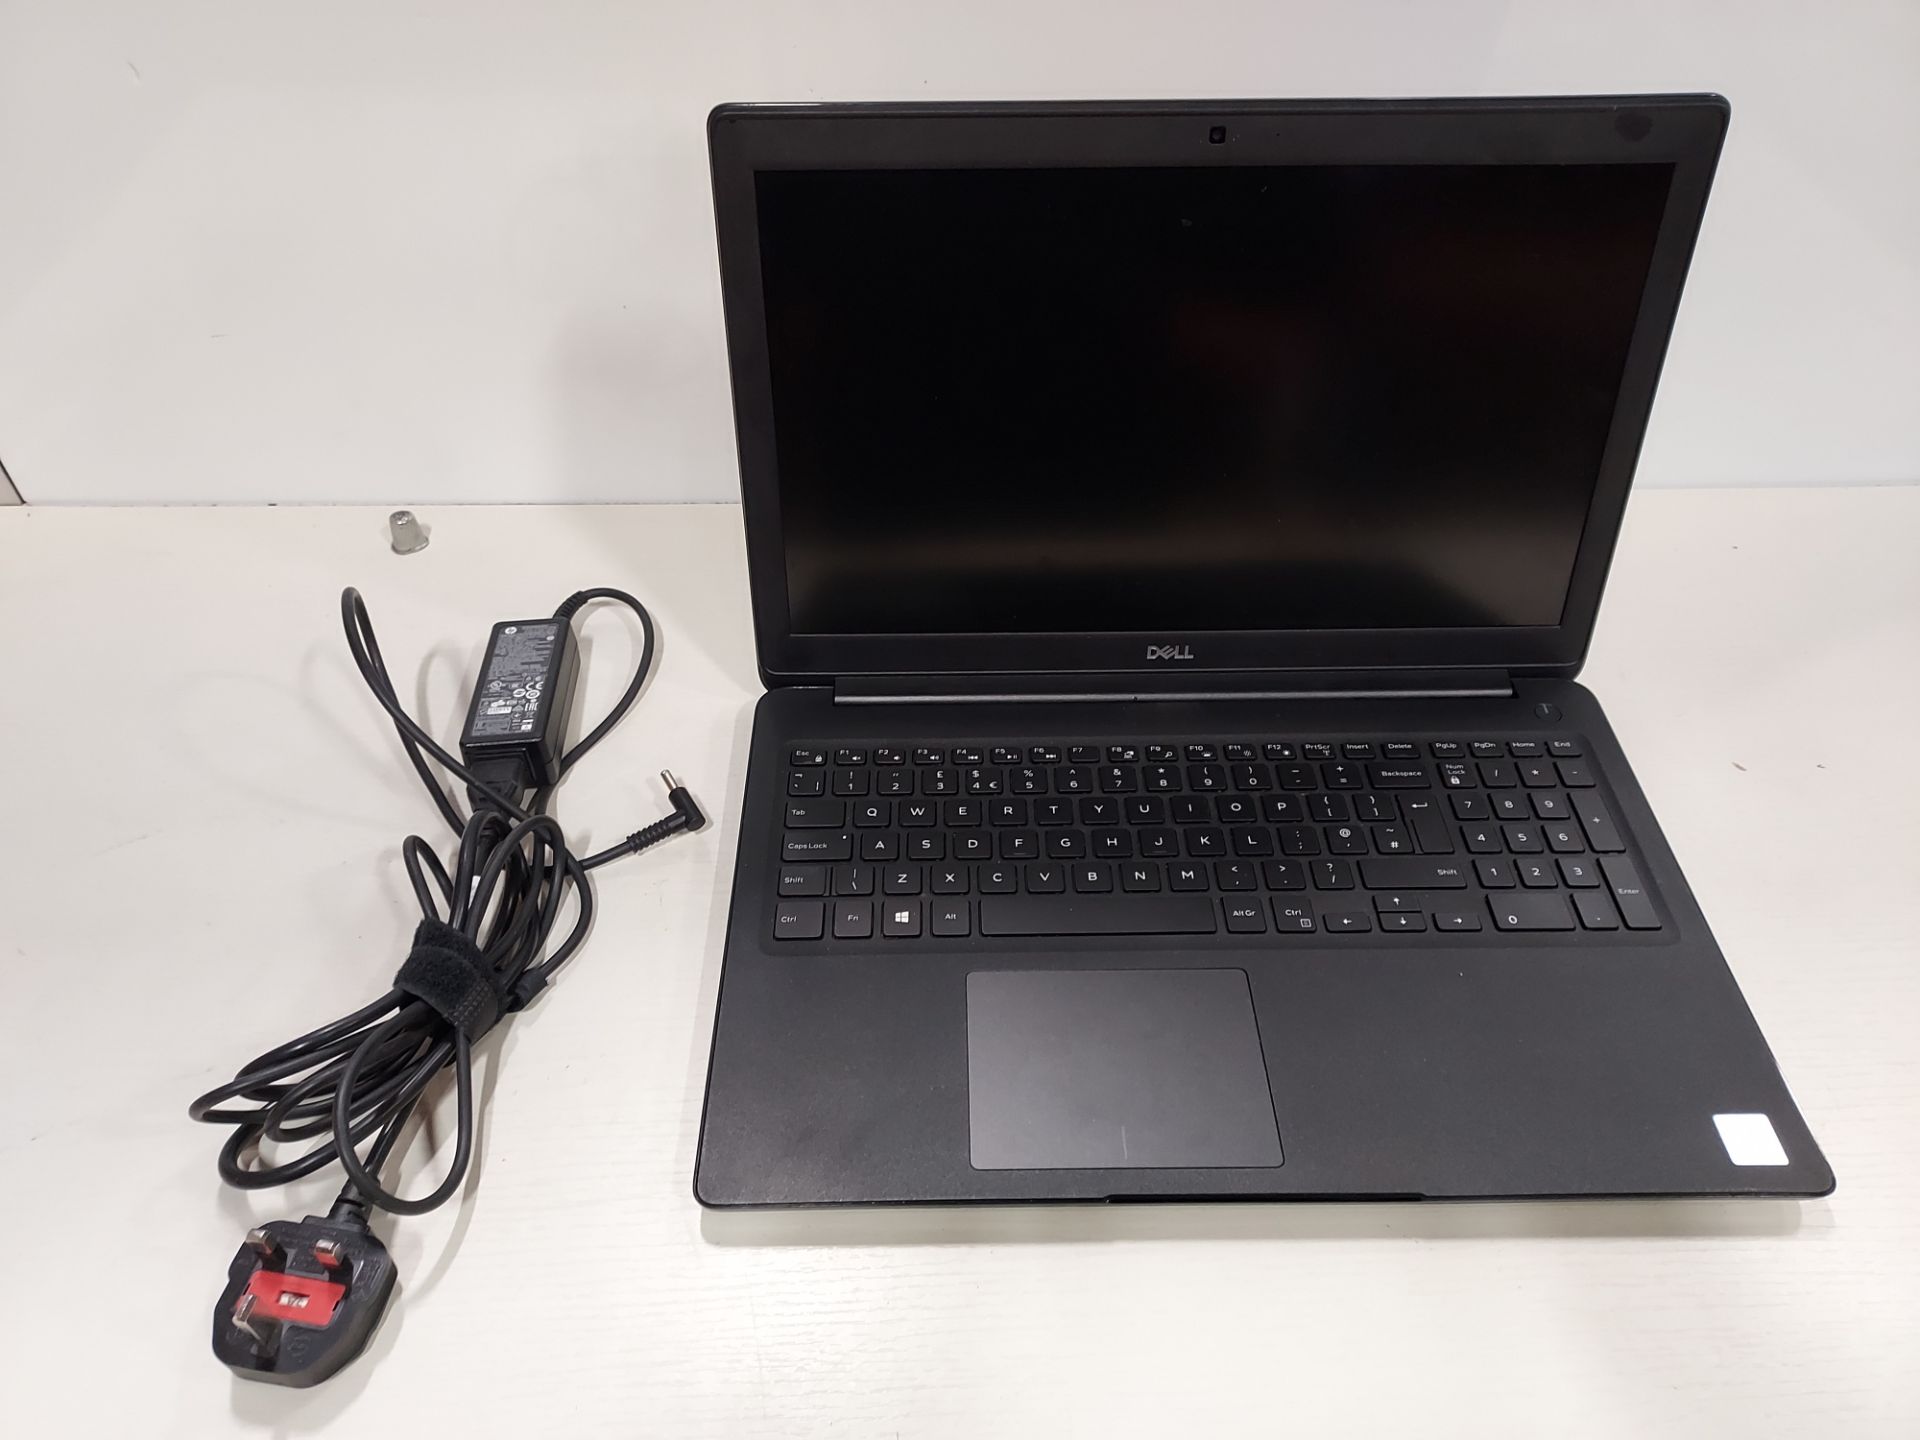 1 X HP LAPTOP - HARD DRIVE WIPED - NO OS - INCLUDES CHARGER